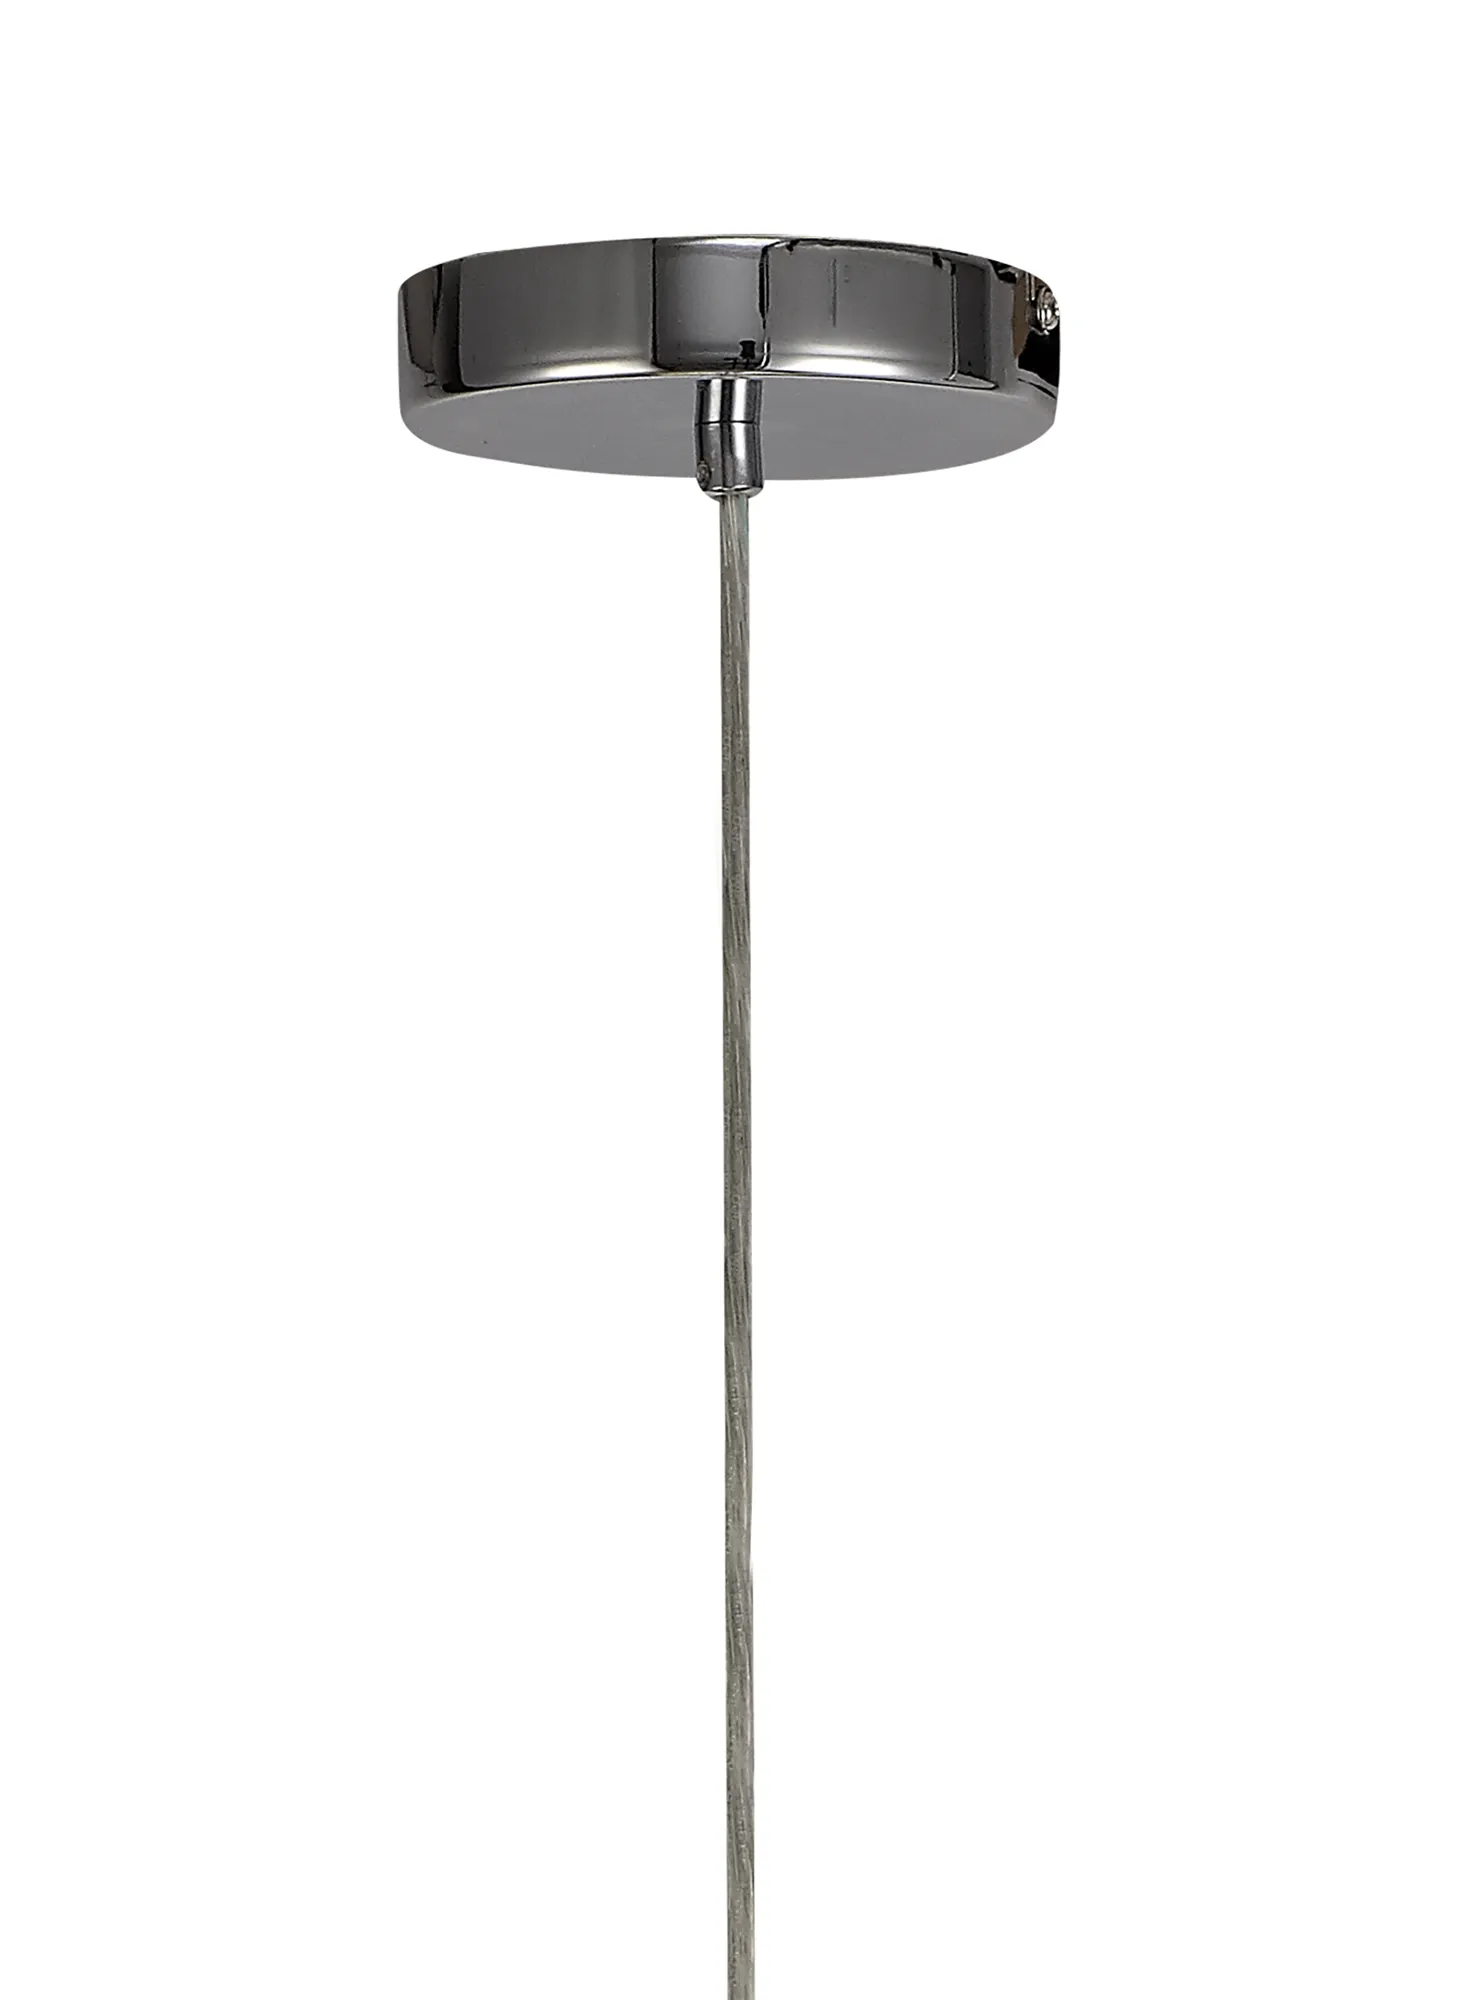 Baymont 60cm 5 Light Pendant Polished Chrome; Nude Beige/Moonlight; Frosted Diffuser DK0476  Deco Baymont CH NU